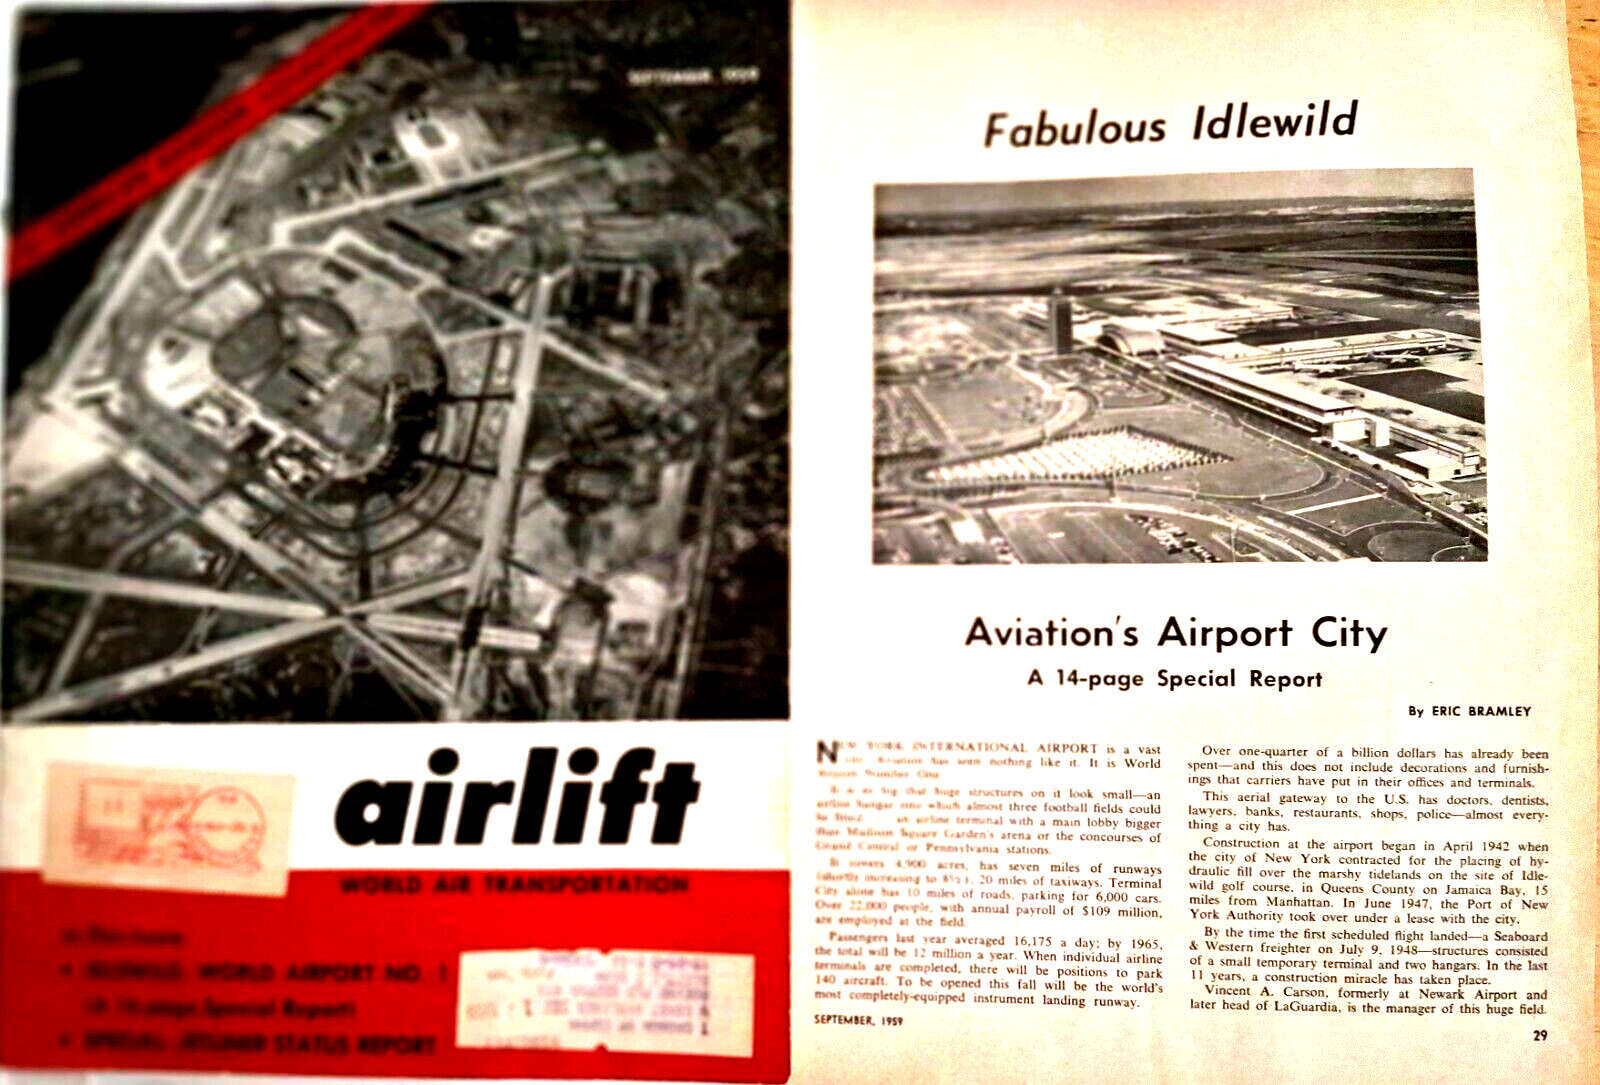 IDLEWILD AIRPORT NEW YORK Prints 1959 Fabulous Idlewild with pictures 8 1/2 X 11